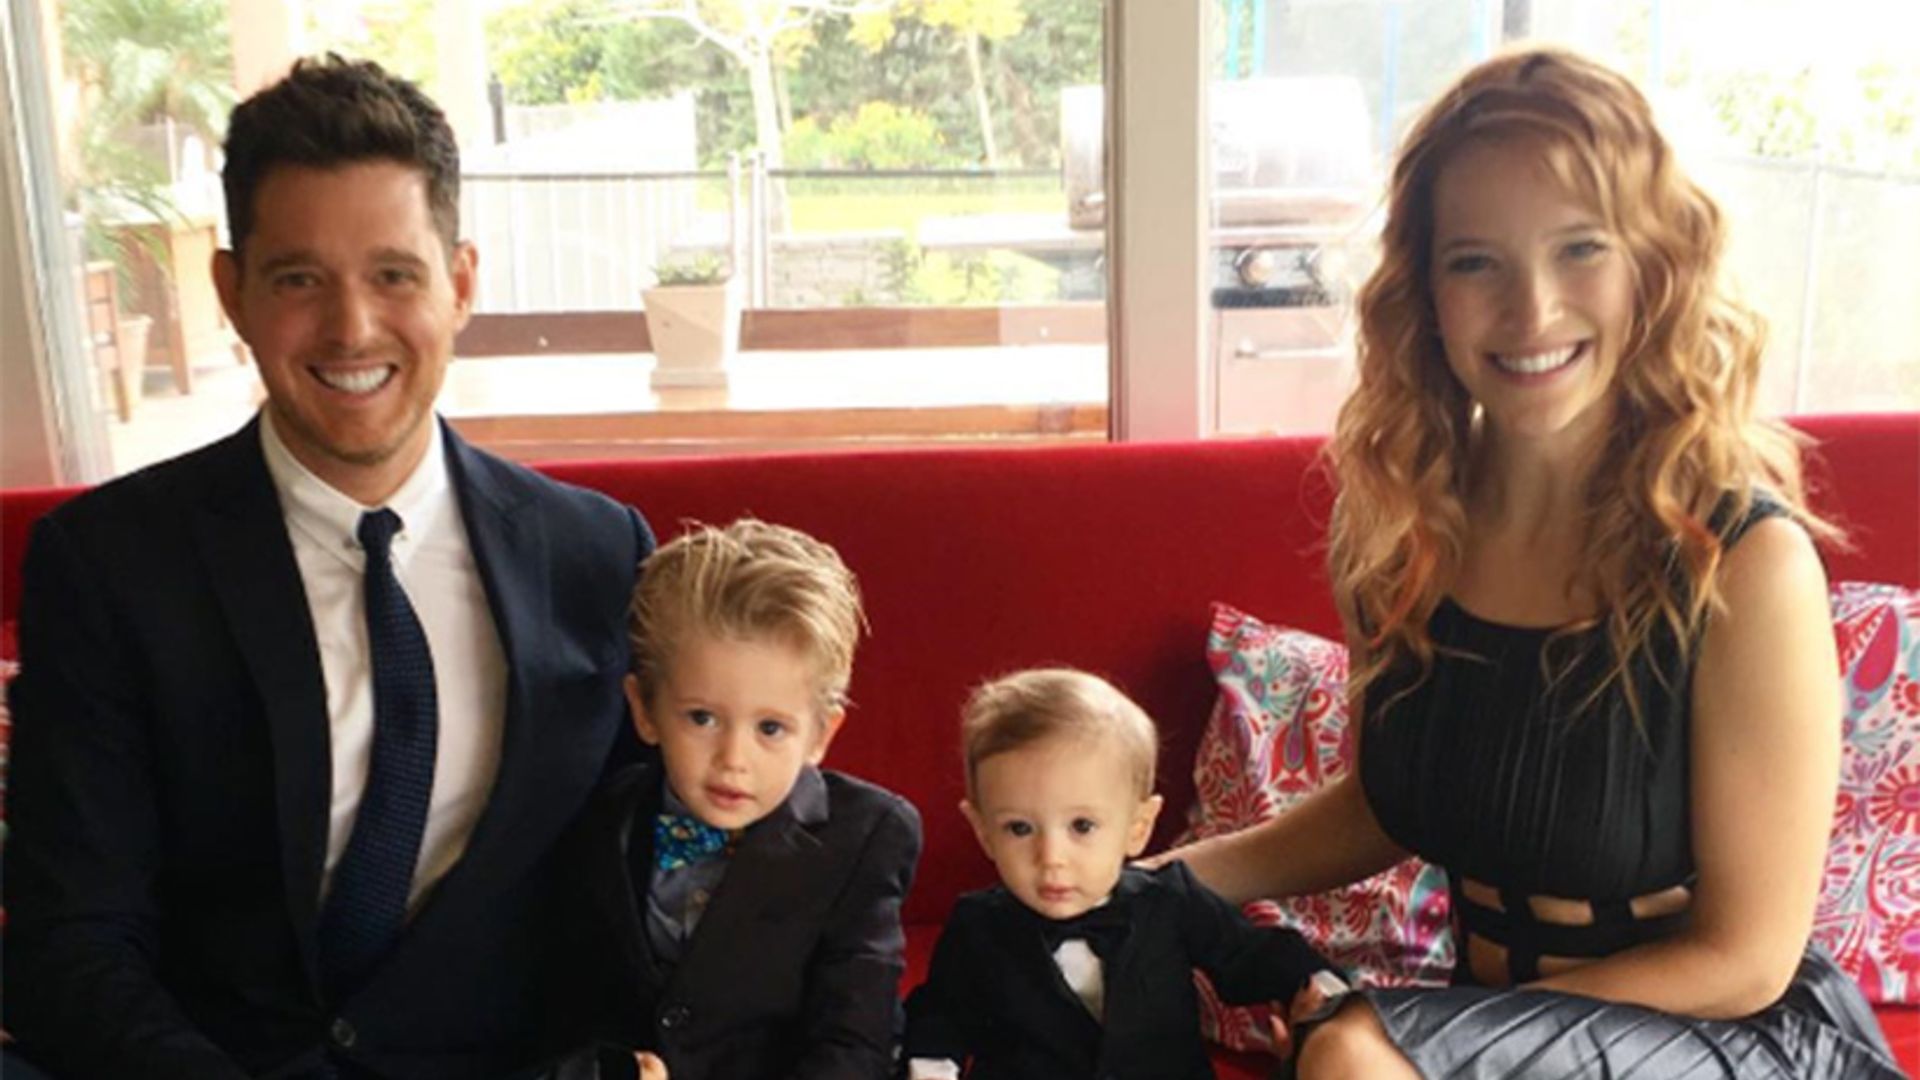 Michael Bublé's son Noah will be home for Christmas